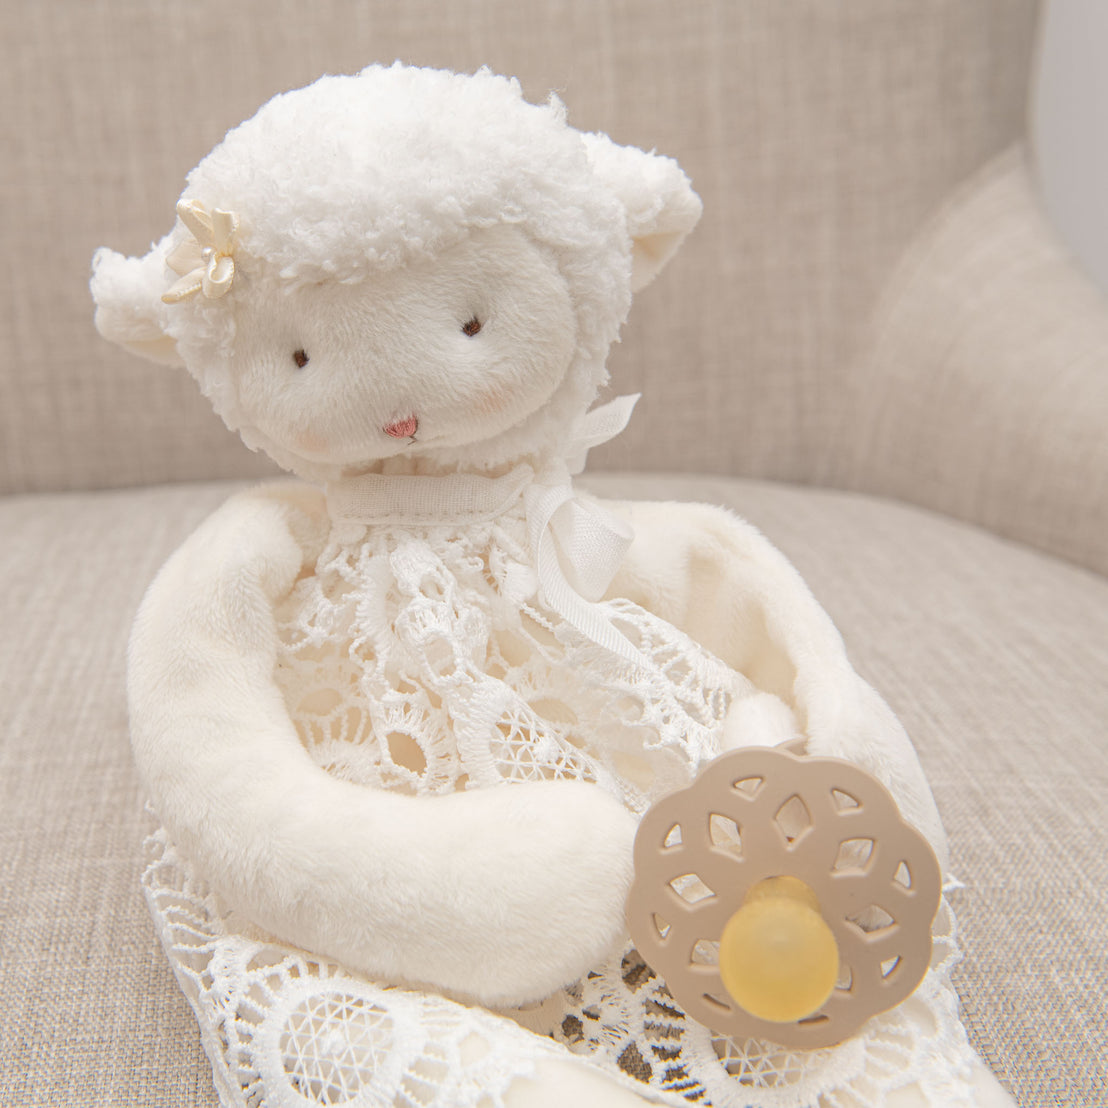 Plush lamb toy holding a baby pacifier.